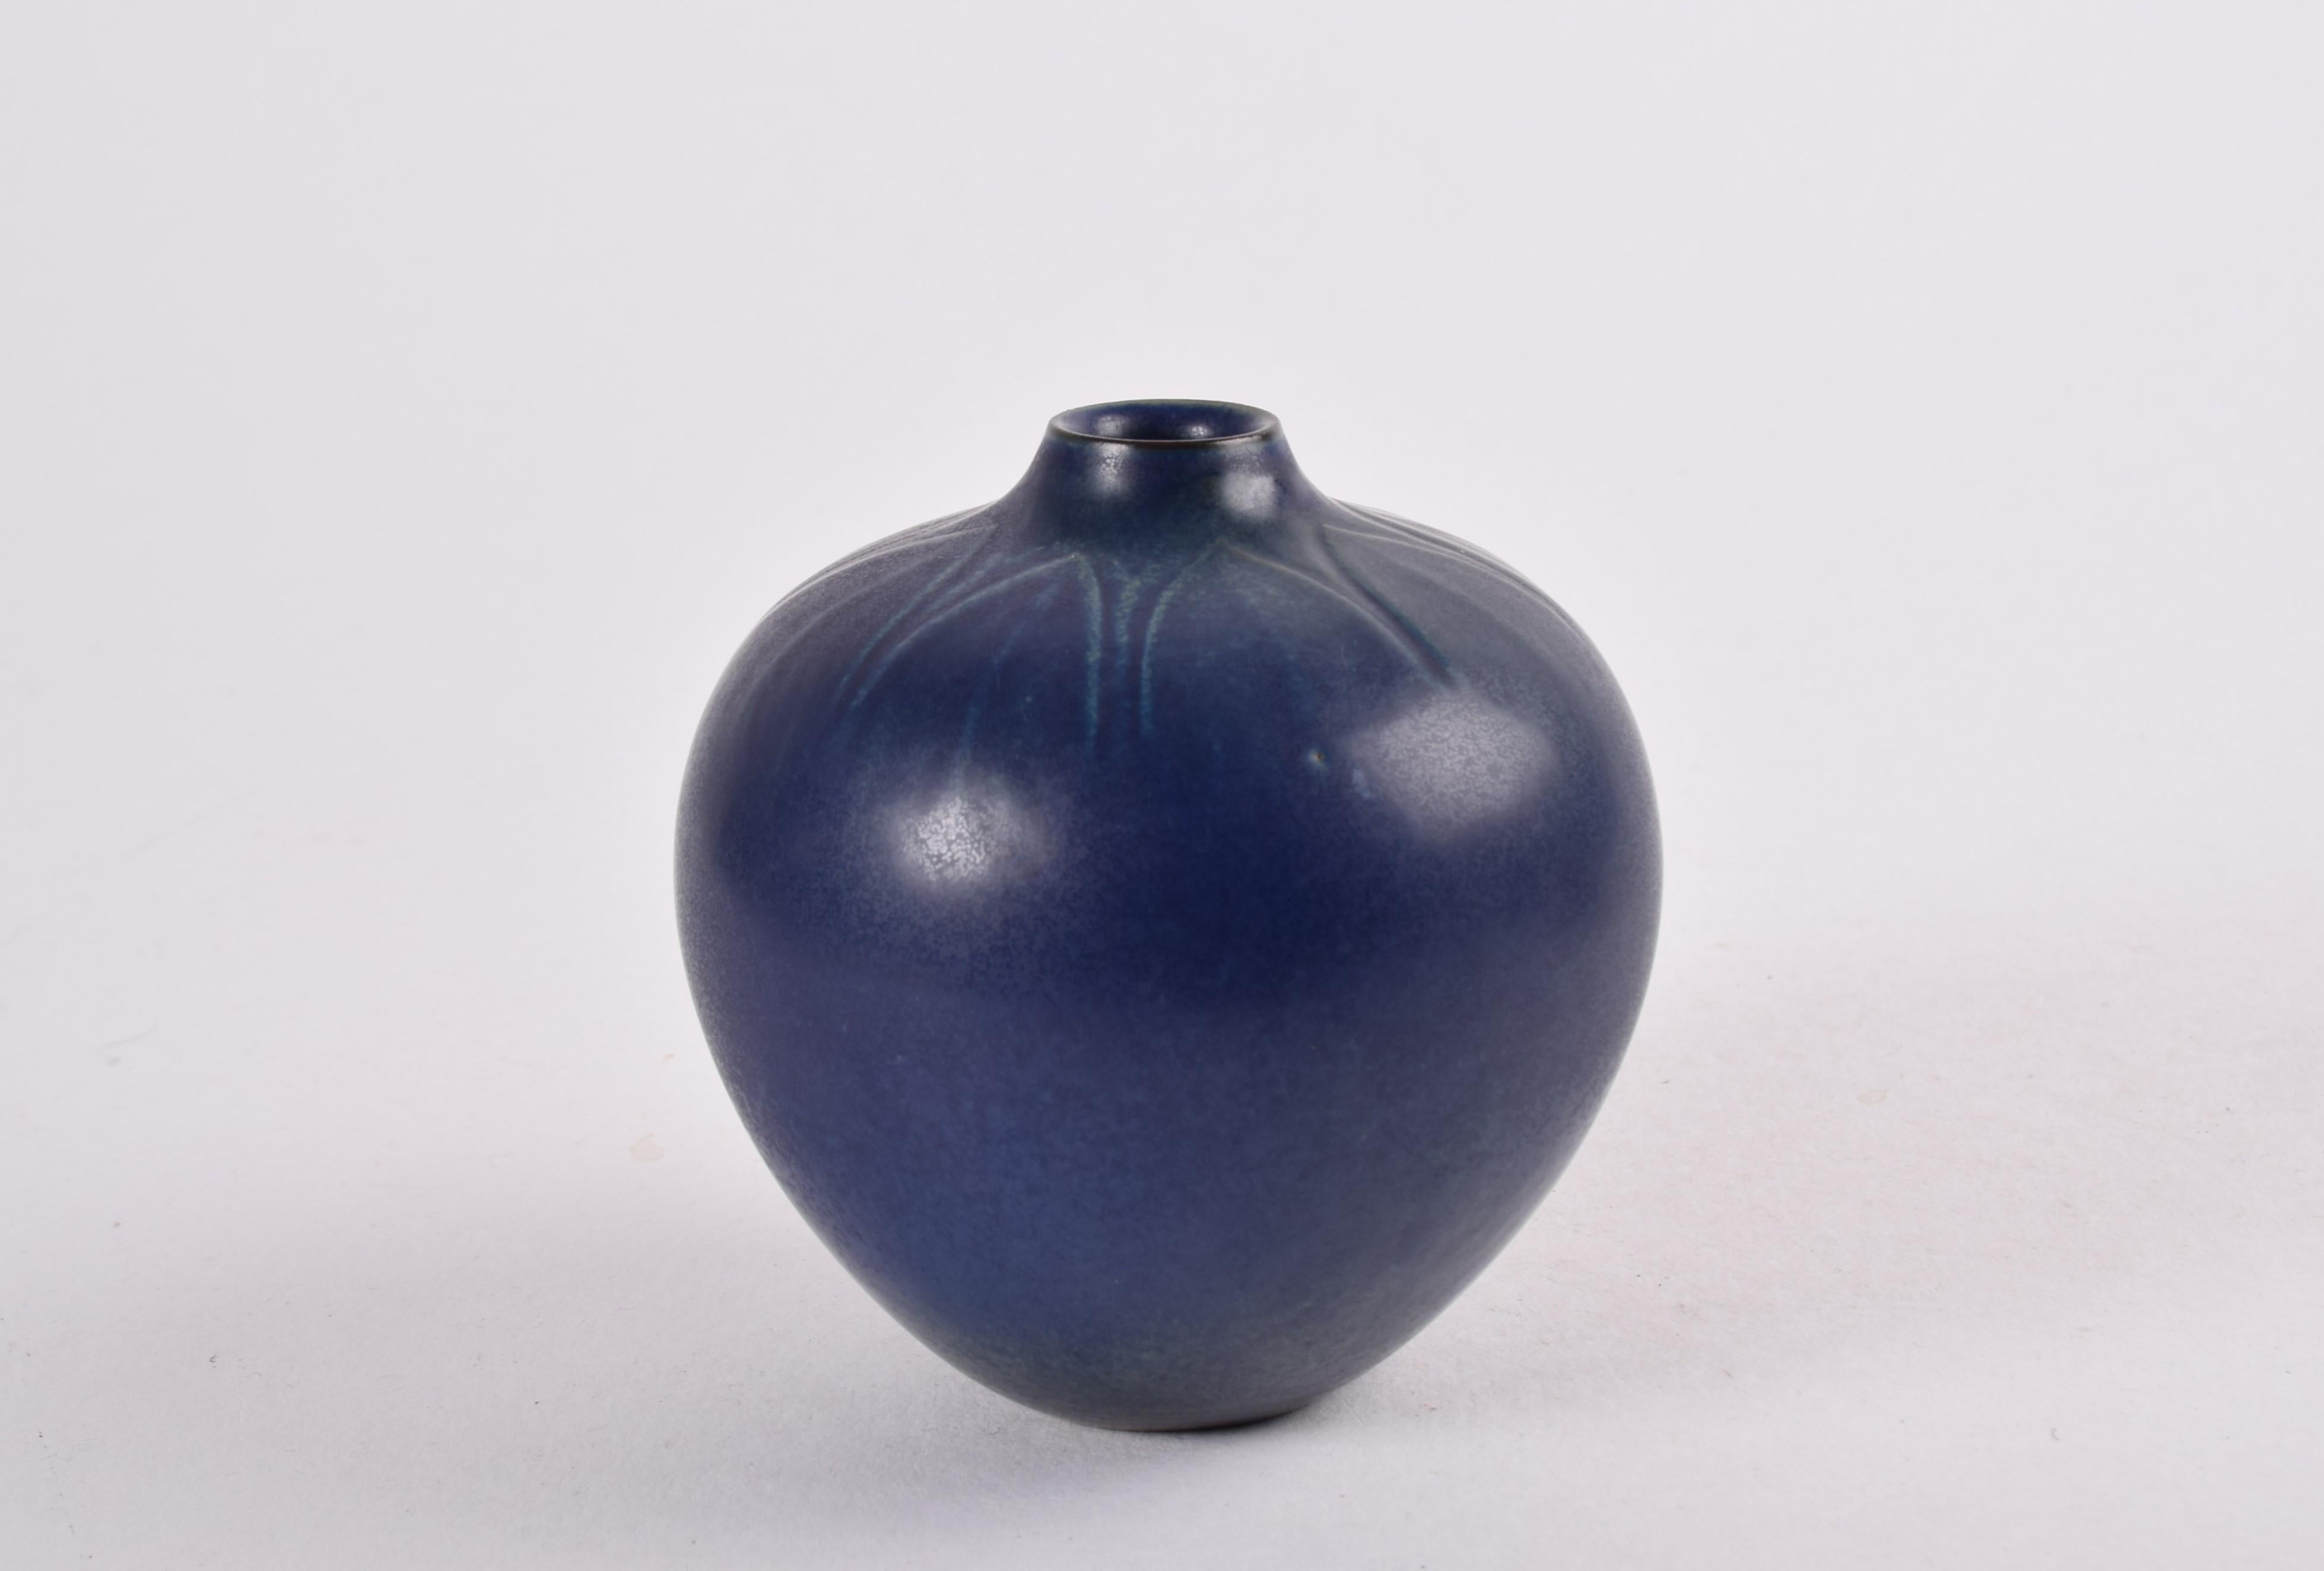 Vintage vase by Danish ceramist Gerd Bøgelund (1923-1987) for Royal Copenhagen Denmark. Made ca 1960s. 

The teardrop shaped vase has a blue glaze with minor green and blue elements and star decor on the shoulders.

Under the bottom it´s marked